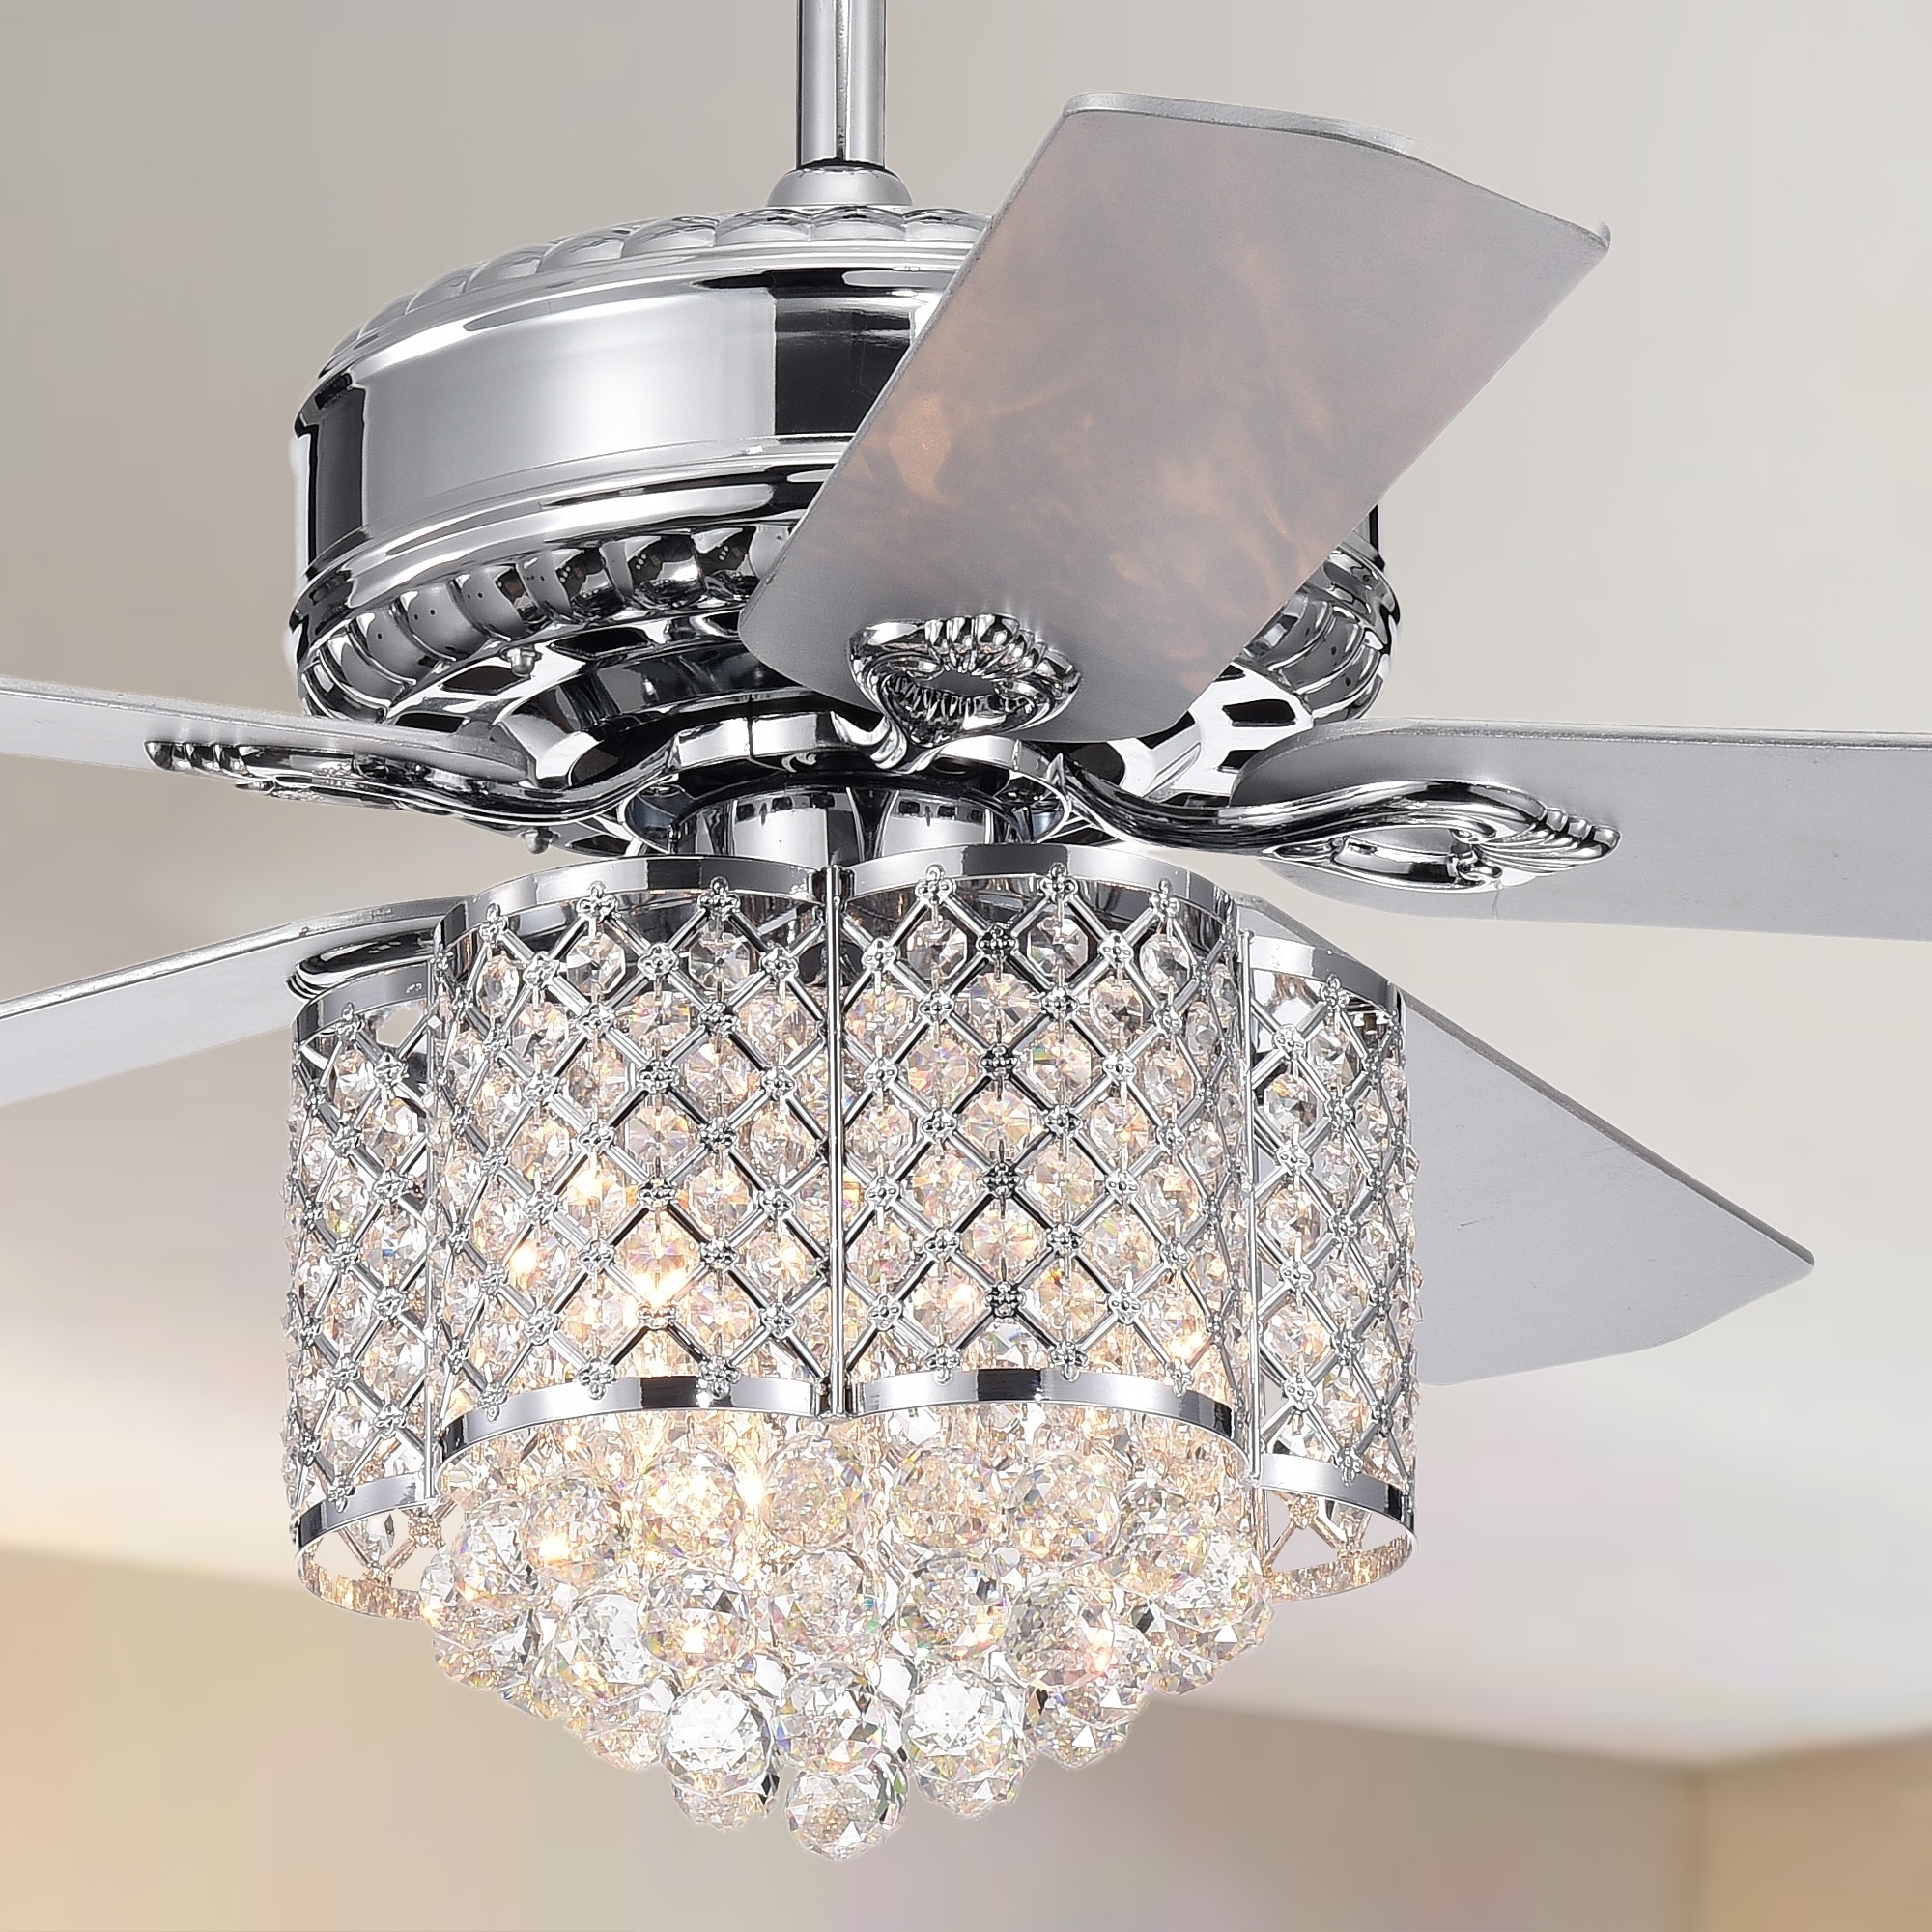 Deidor 5 Blade 52 Inch Chrome Ceiling Fan With 3 Light Crystal Chandelier Remote Controlled 2 Color Option